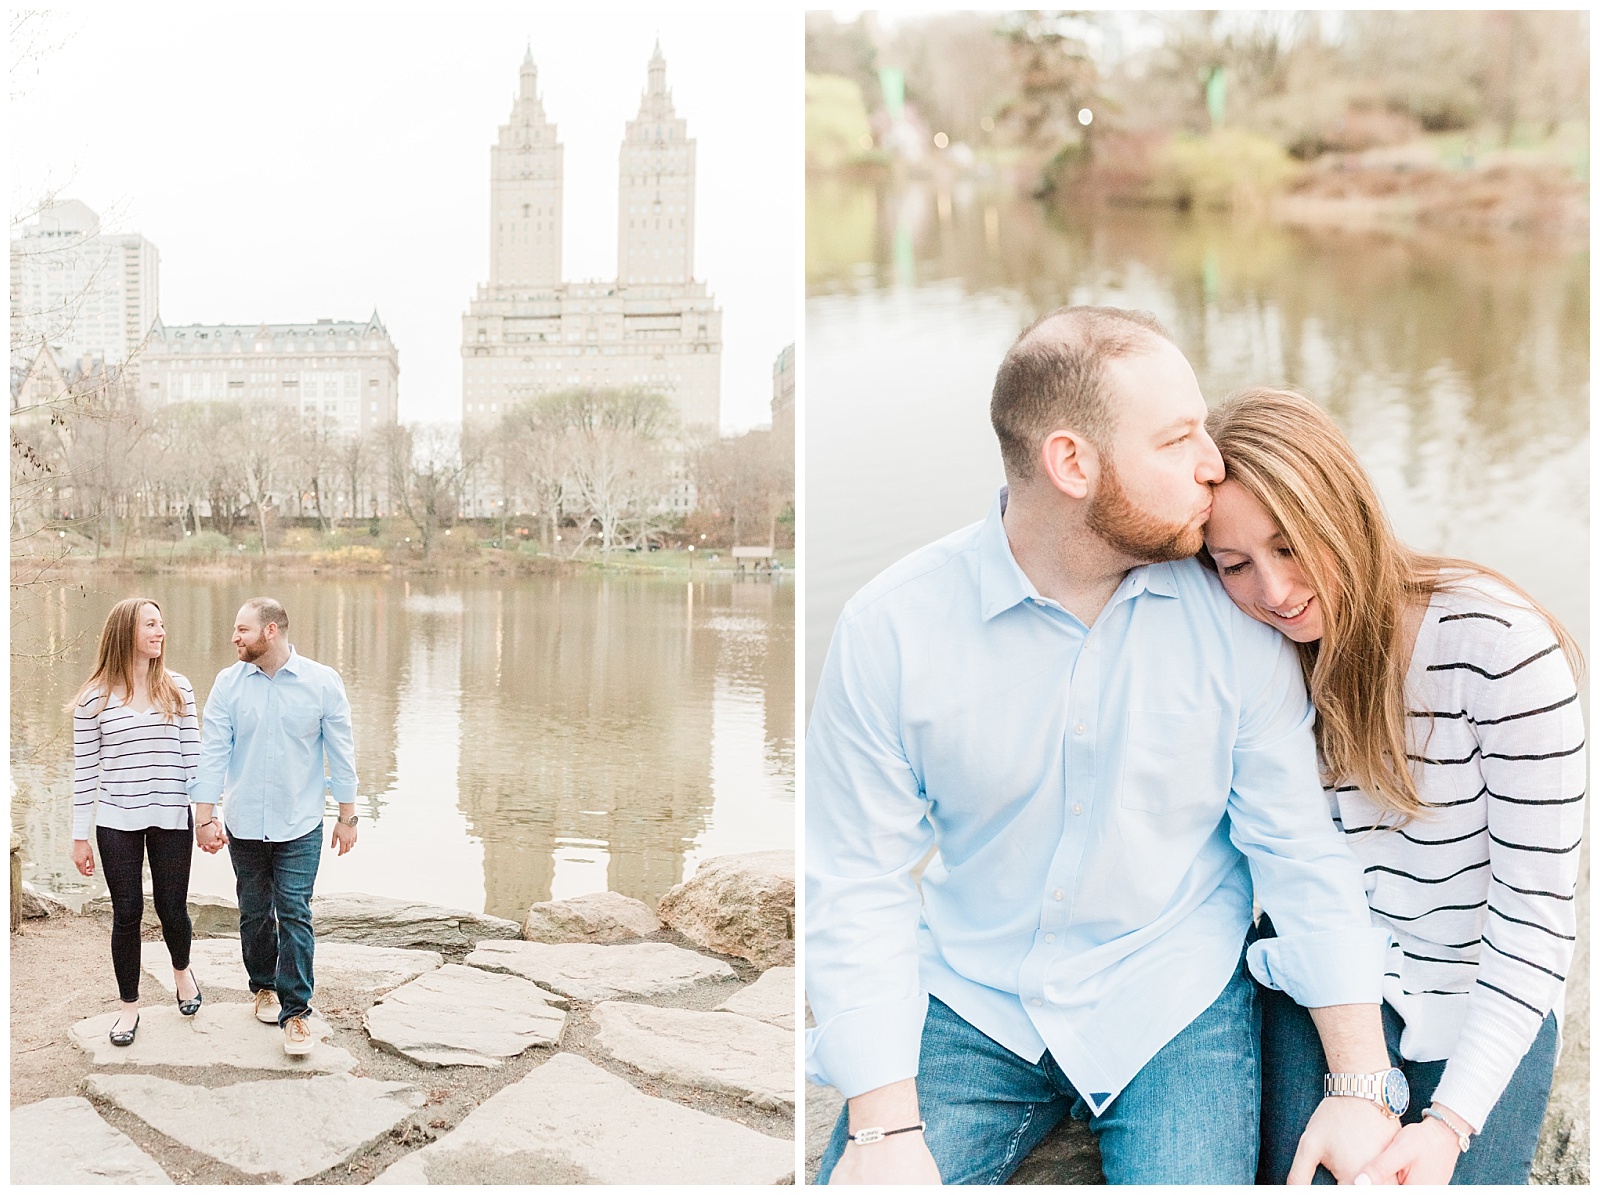 Central Park, NYC engagement session, springtime, wedding photographer, New York, architecture, towers